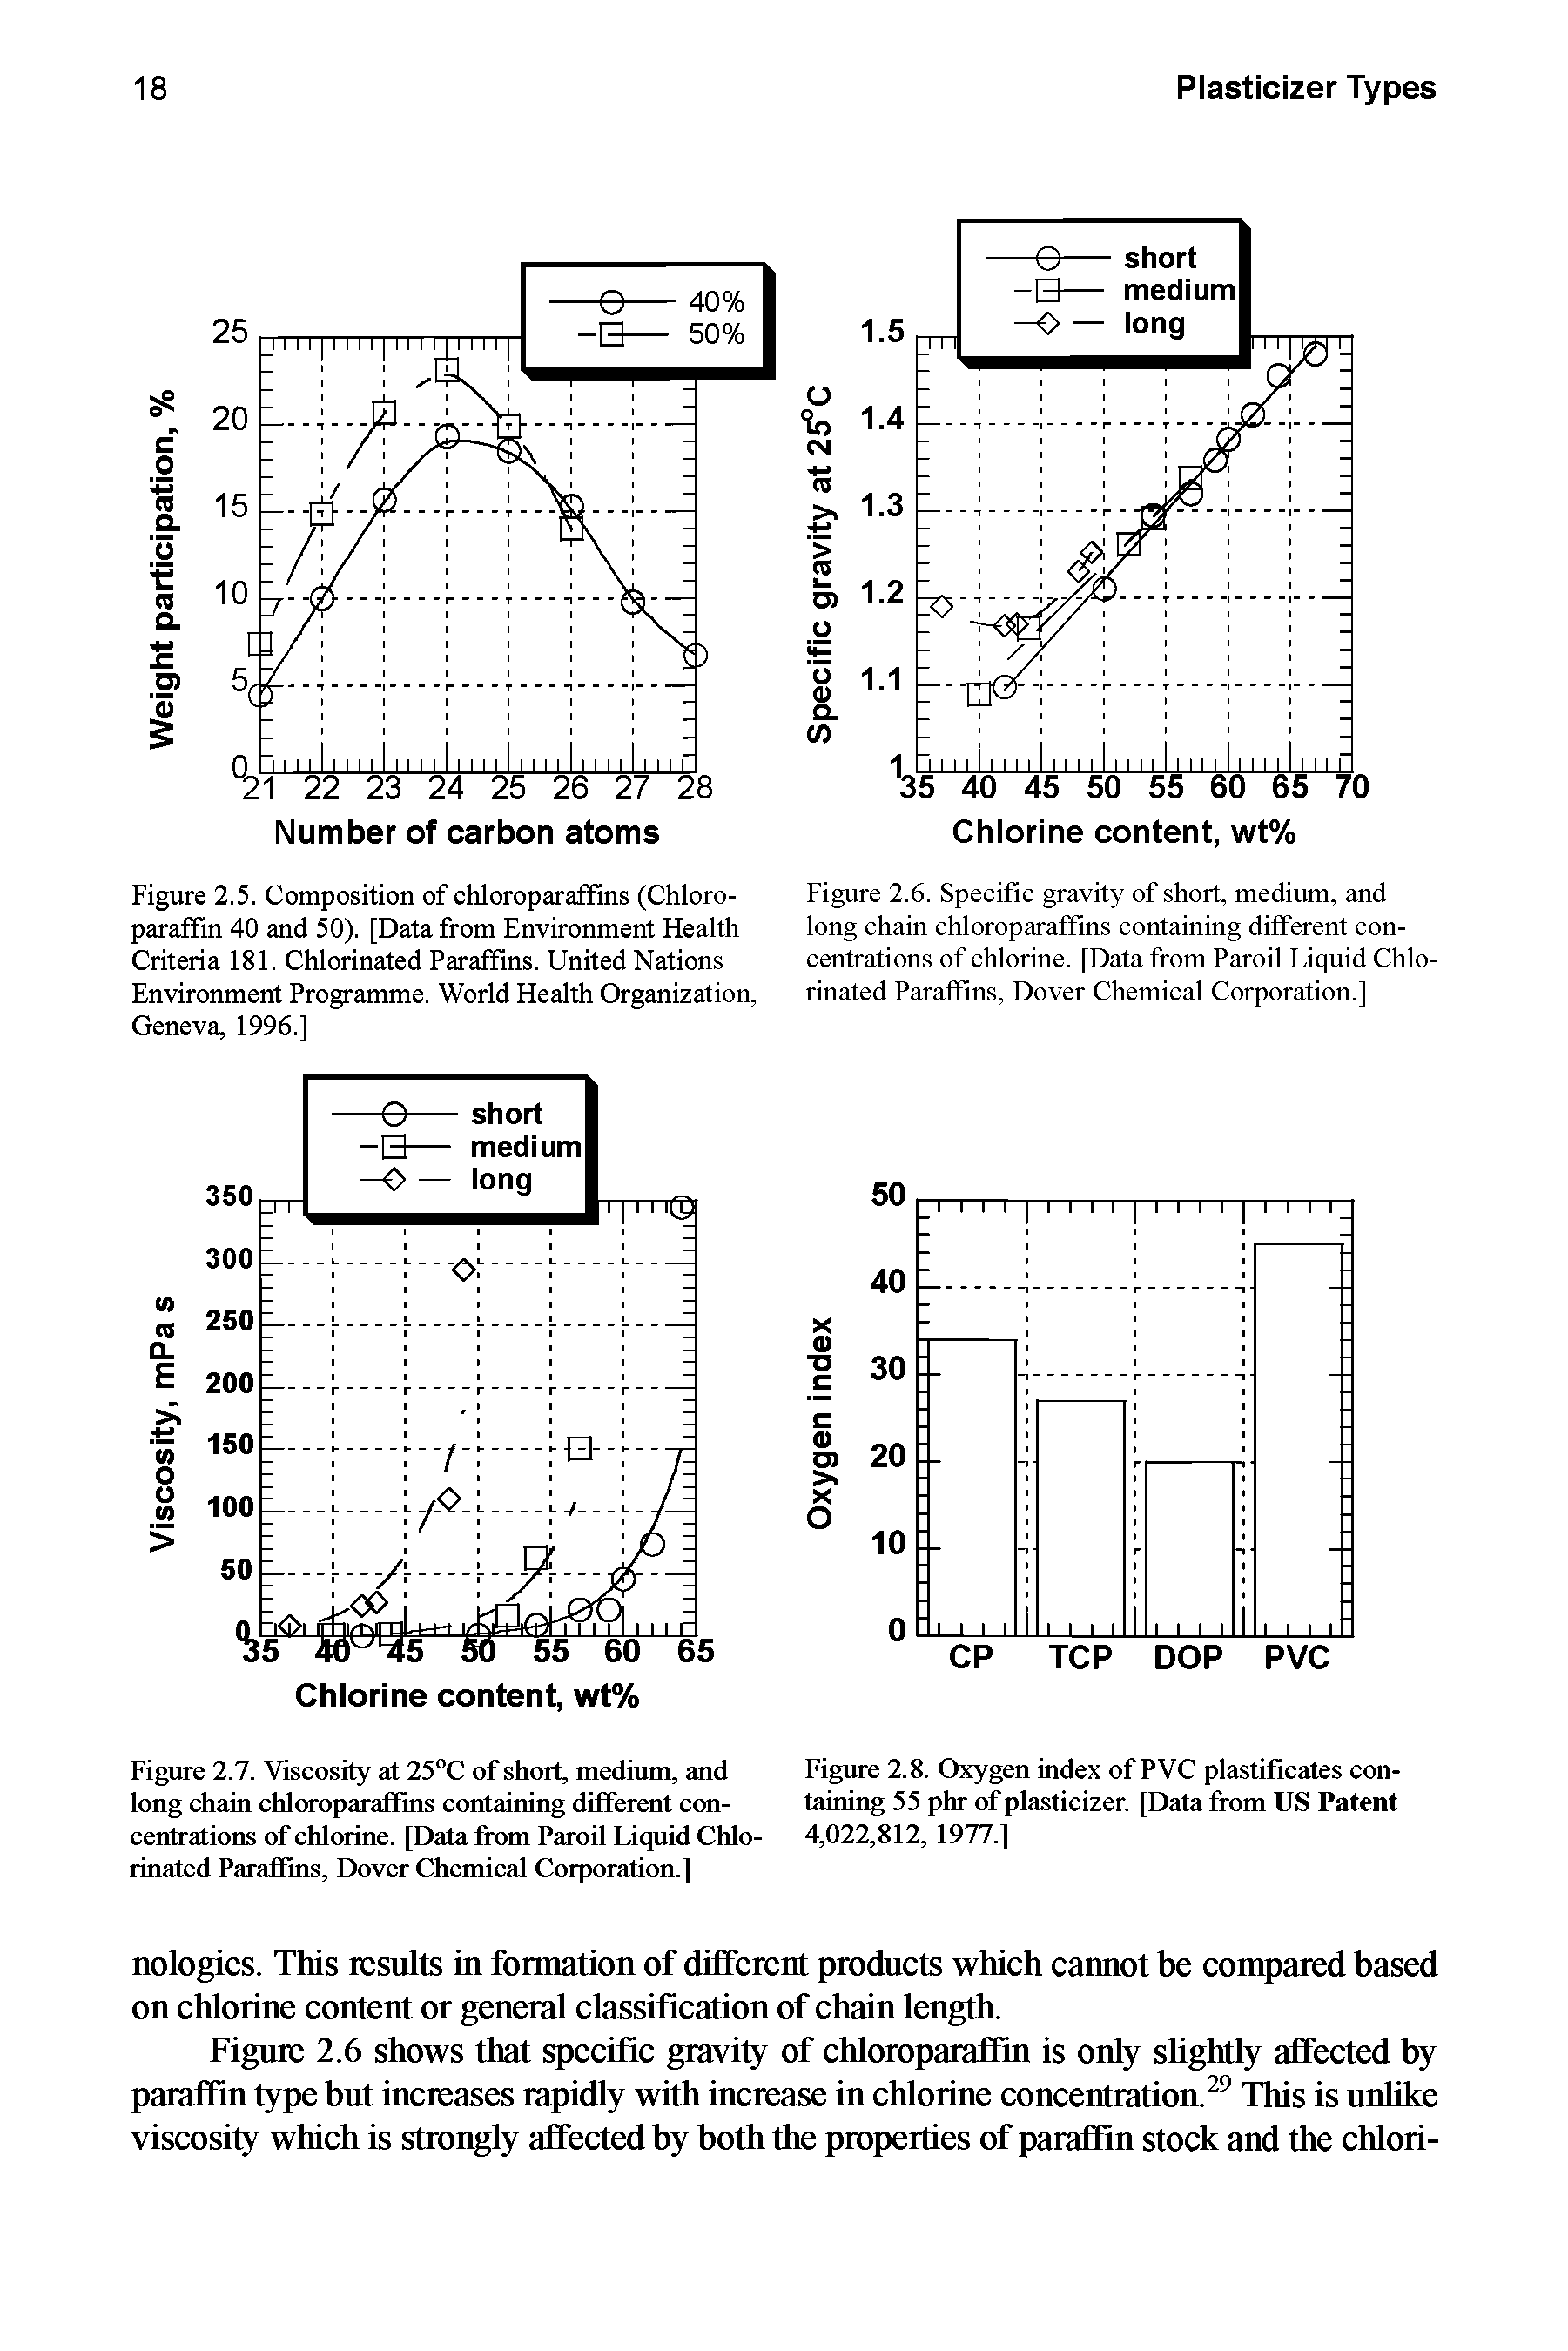 Figure 2.6. Specific gravity of short, medium, and long chain chloroparafFins containing different concentrations of chlorine. [Data from Paroil Liquid Chlorinated Paraffins, Dover Chemical Corporation.]...